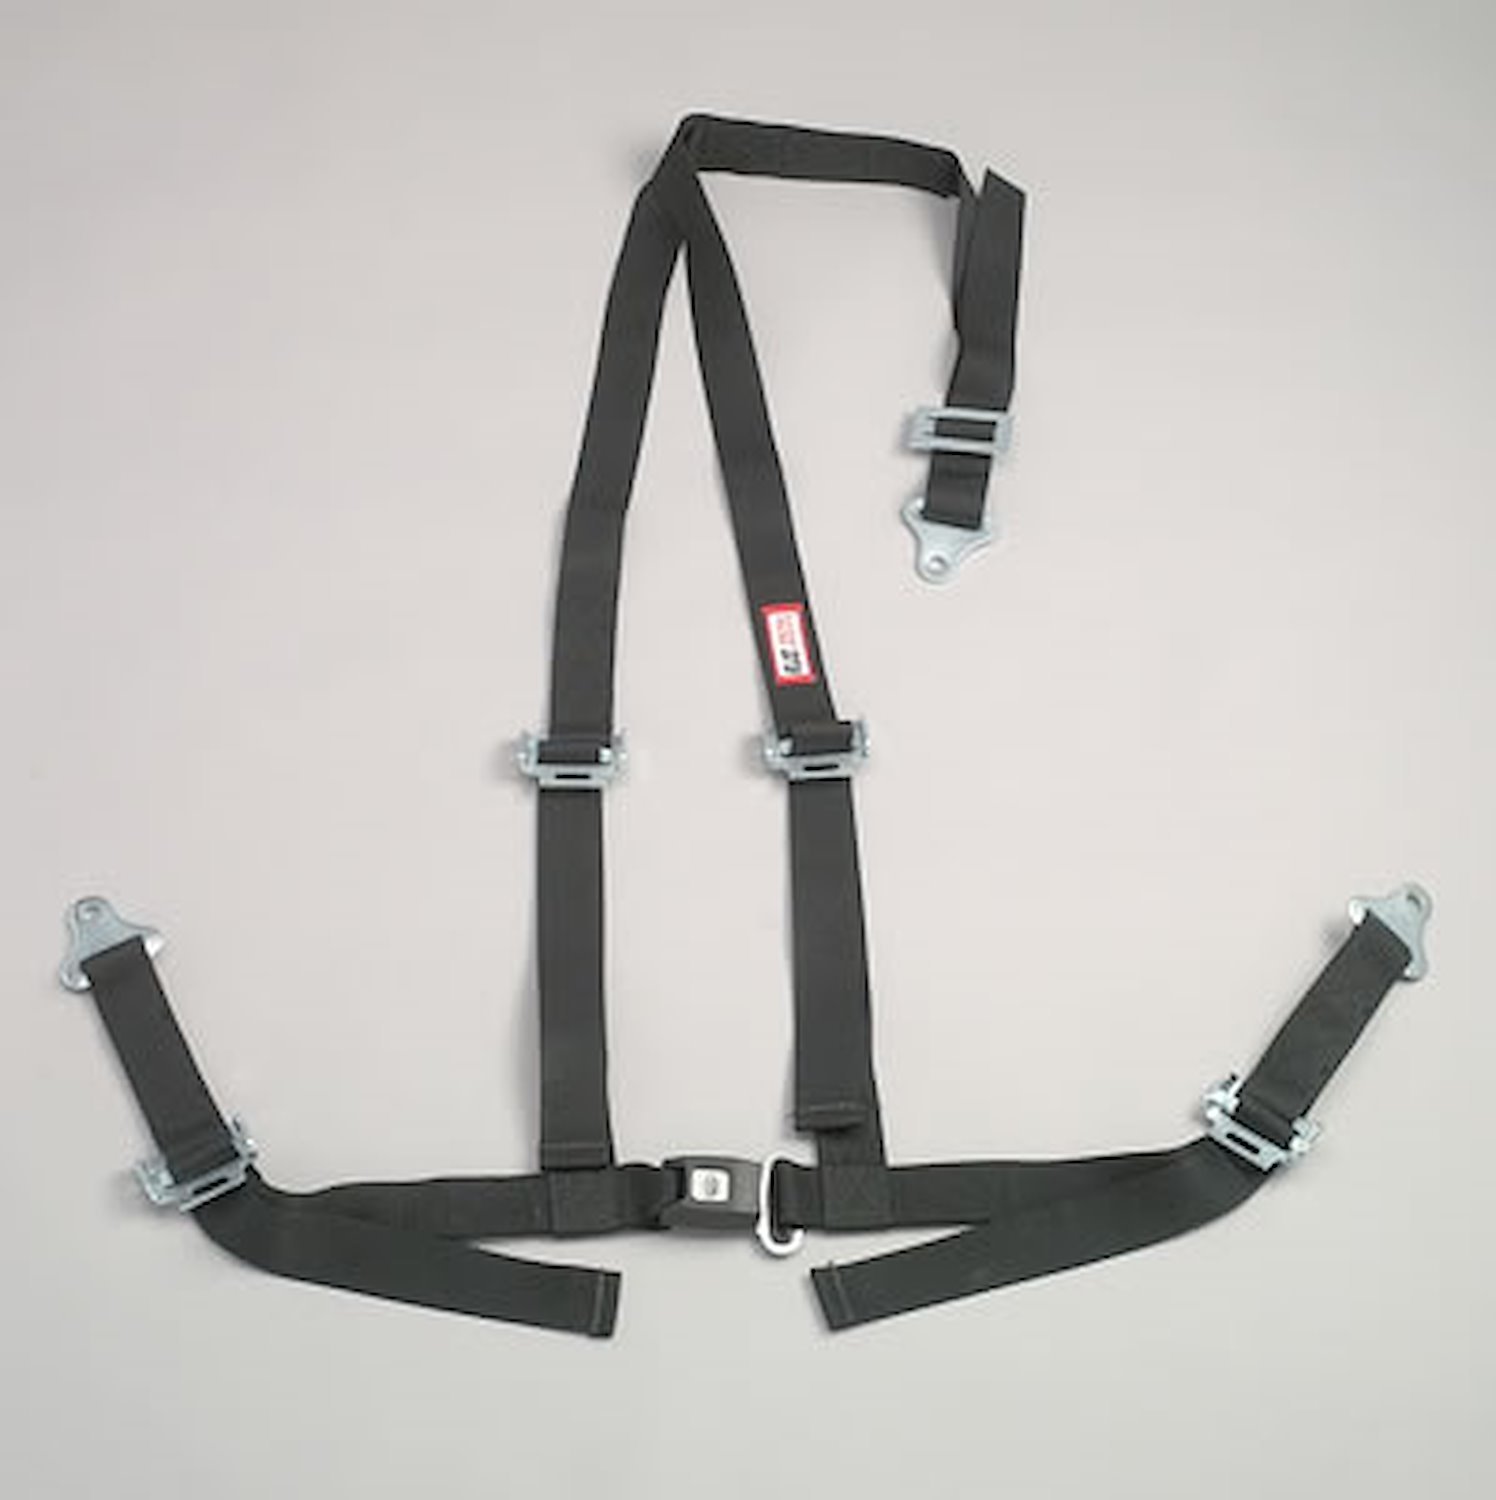 NON-SFI B&T HARNESS 2 PULL DOWN Lap Belt SNAP 2 S.H. INDIVIDUAL FLOOR Mount WRAP/BOLT RED